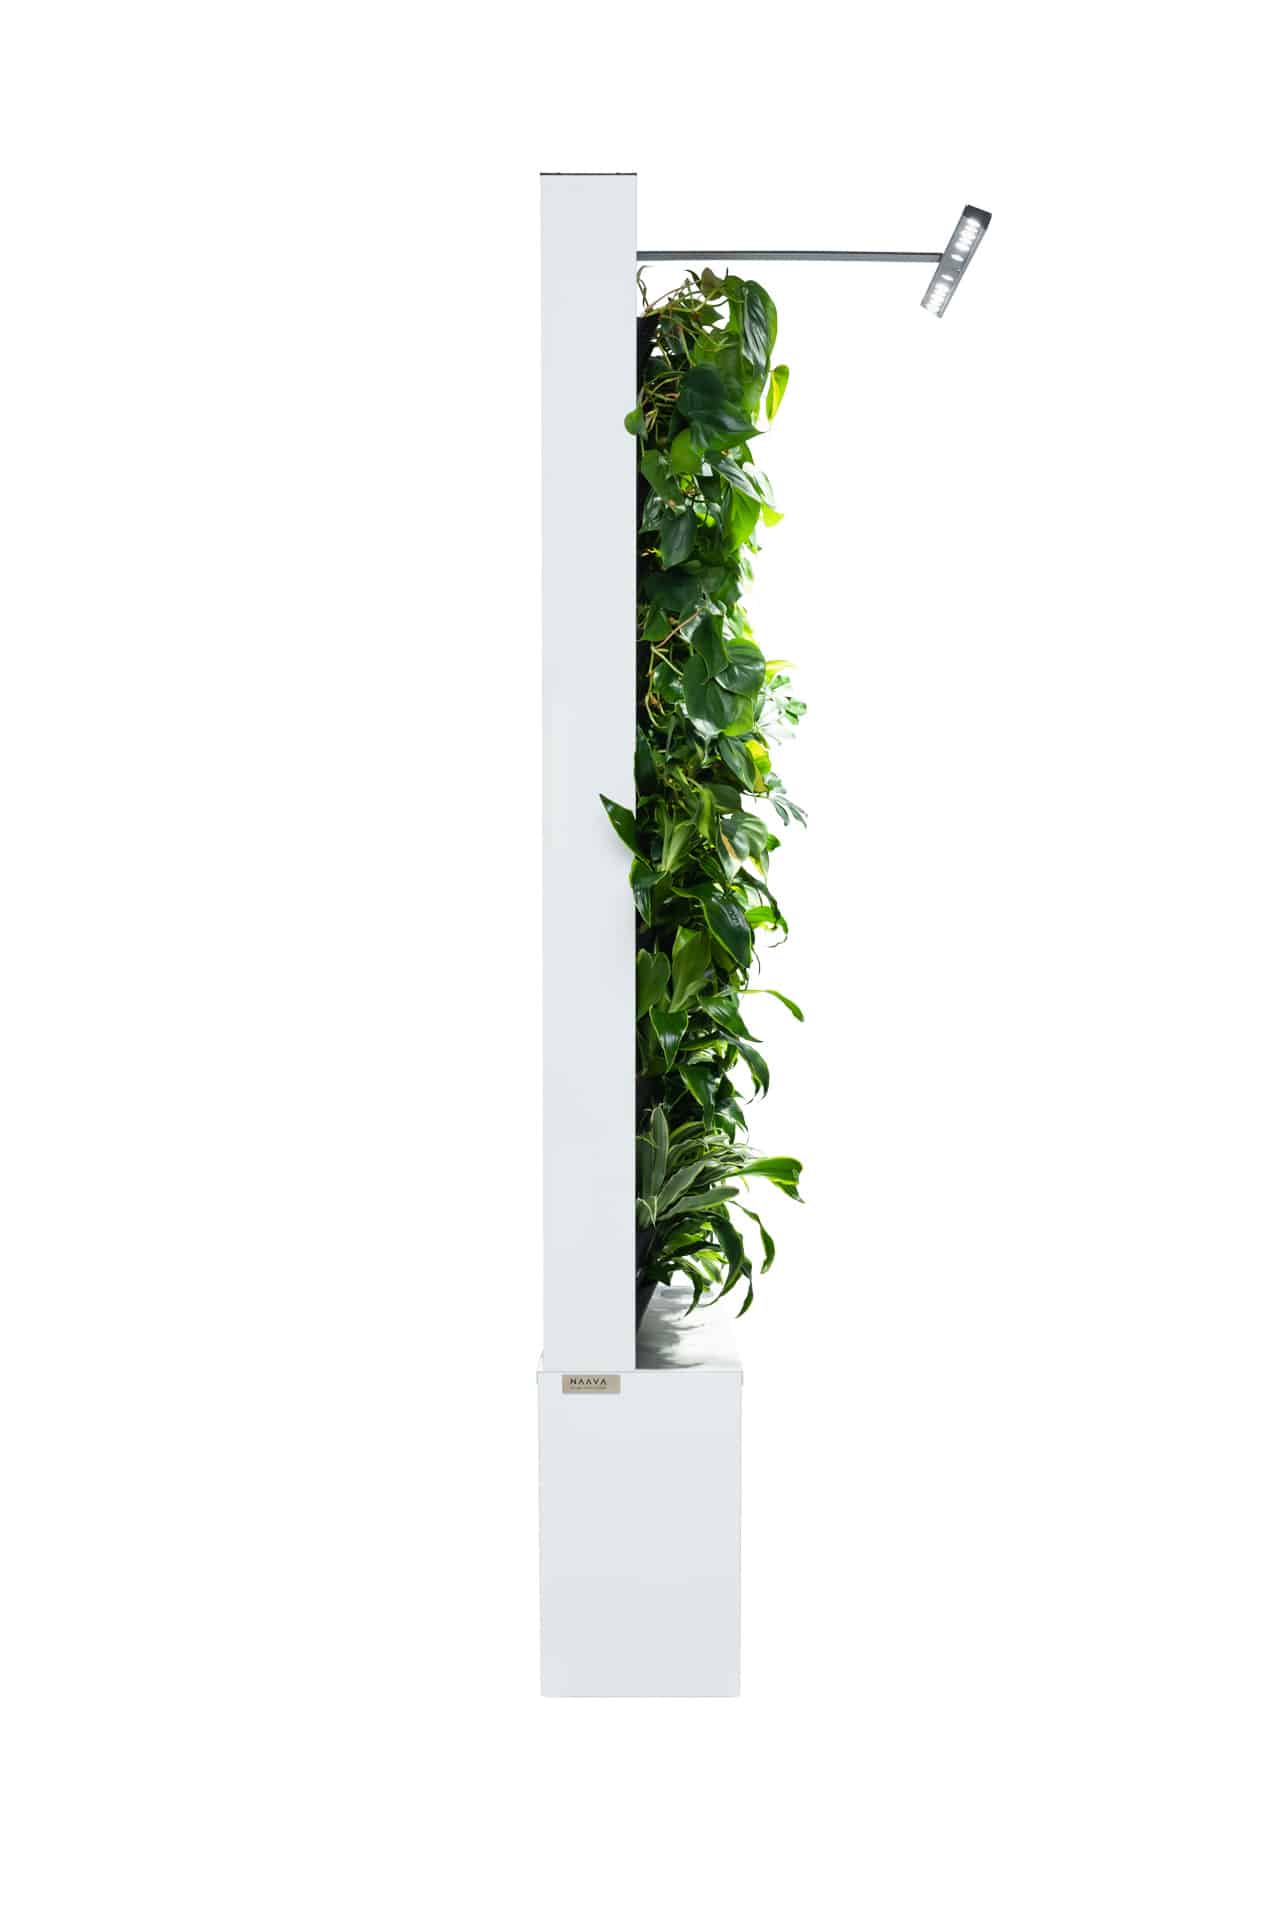 Naava One white indoor green wall to improve air quality